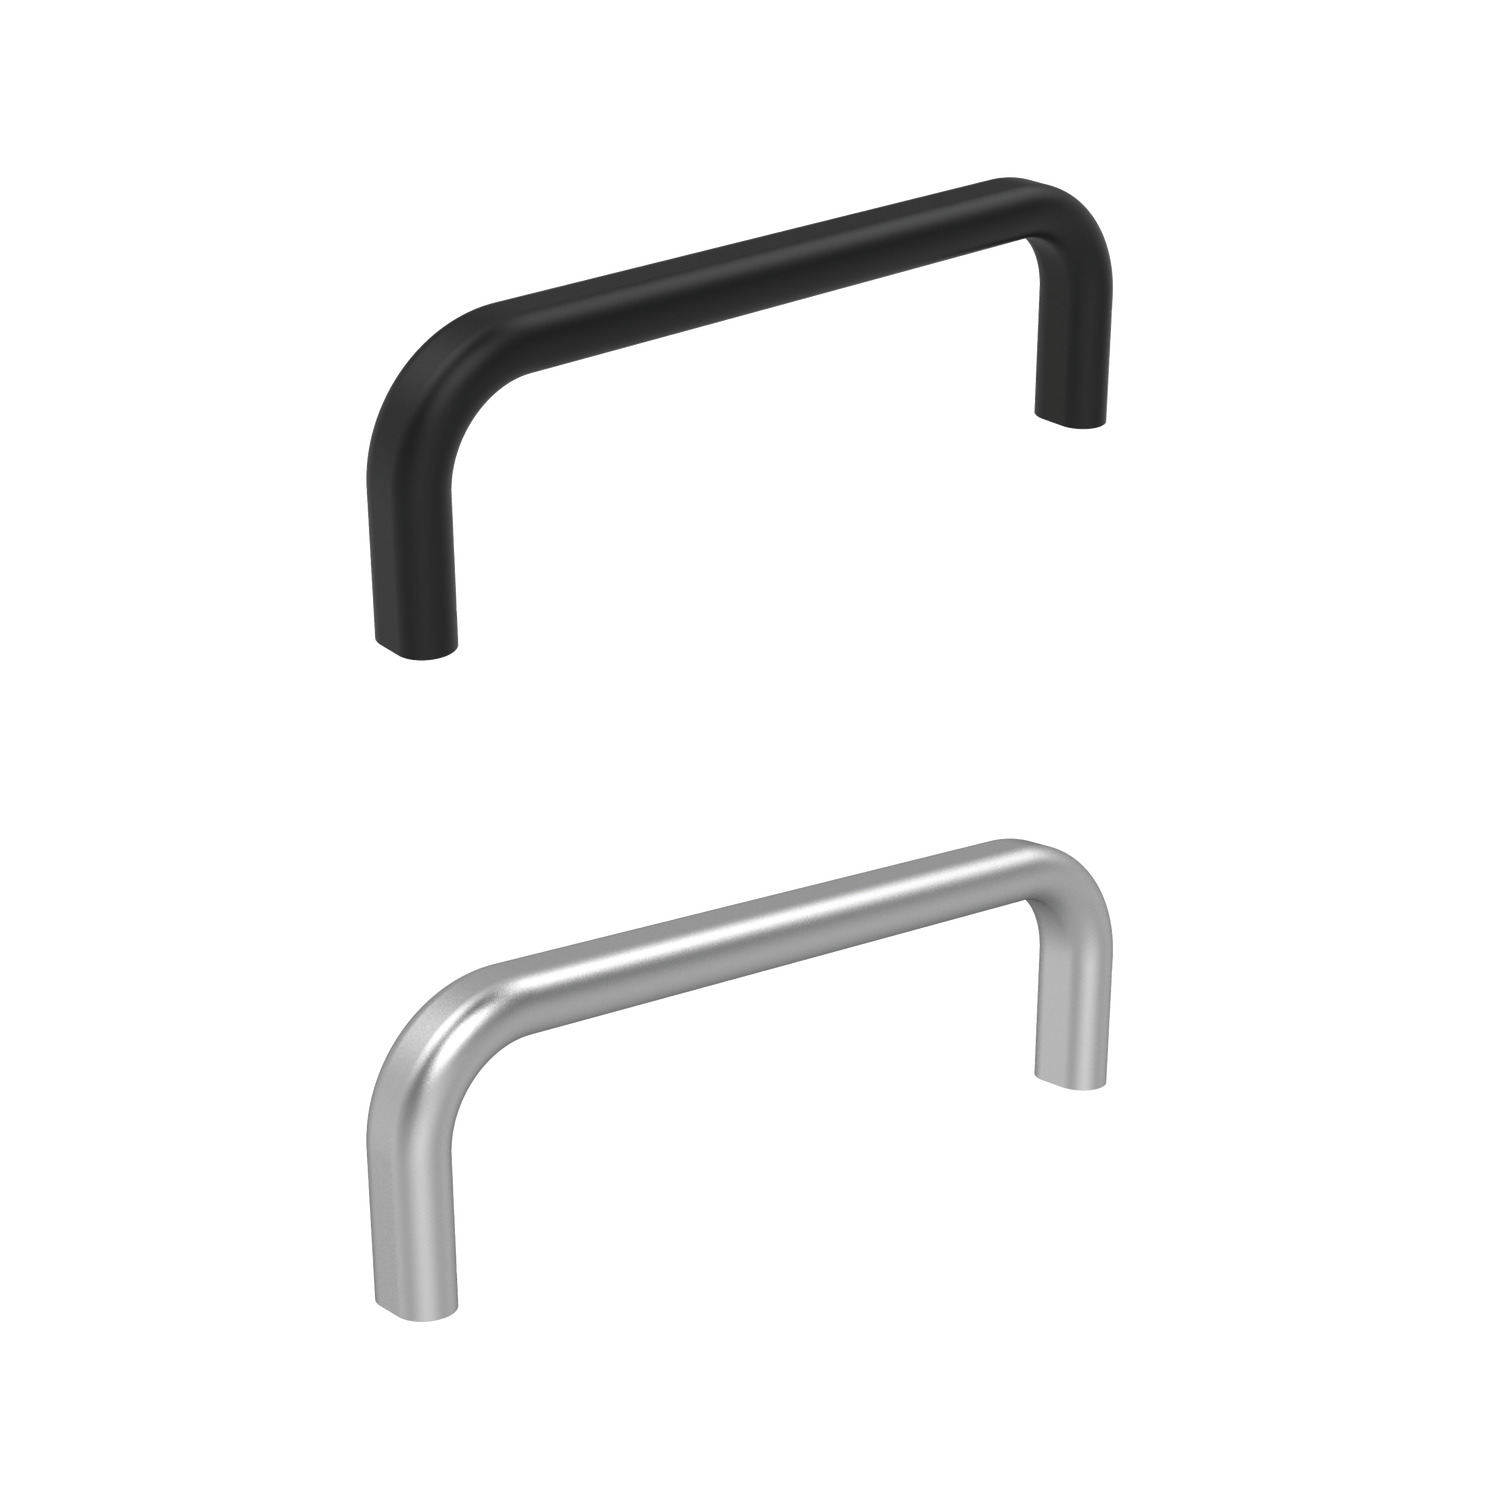 Pull Handles - Oval Our aluminium oval pull handles are anodized with a matte finish in natural colour or black. Minimum stress resistance of 500N.